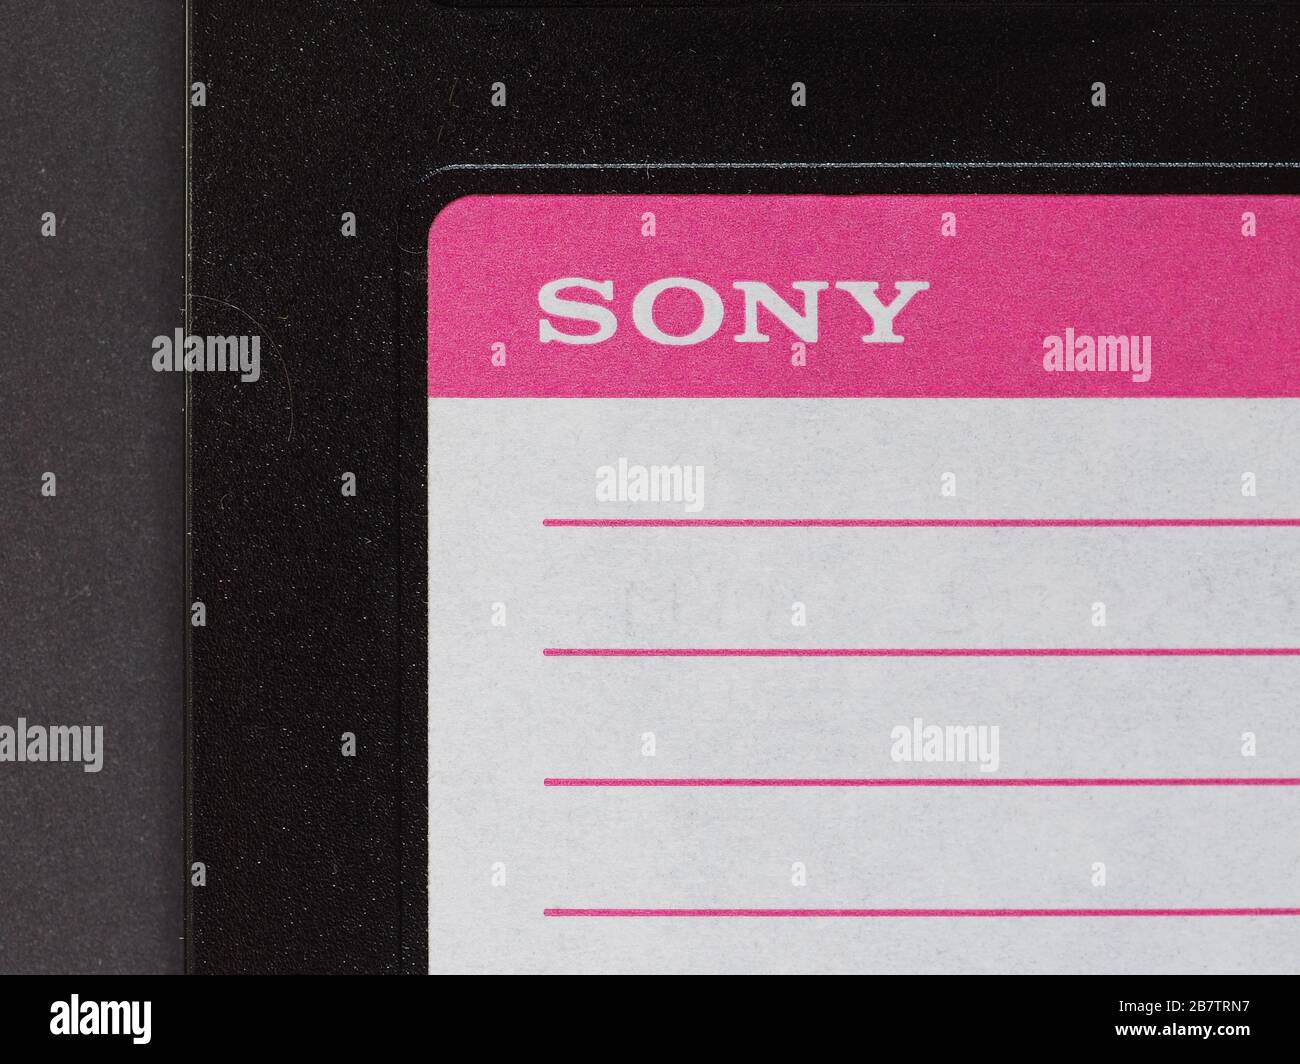 TOKYO, JAPAN - CIRCA MARCH 2020: Sony sign on a magnetic disk Stock Photo